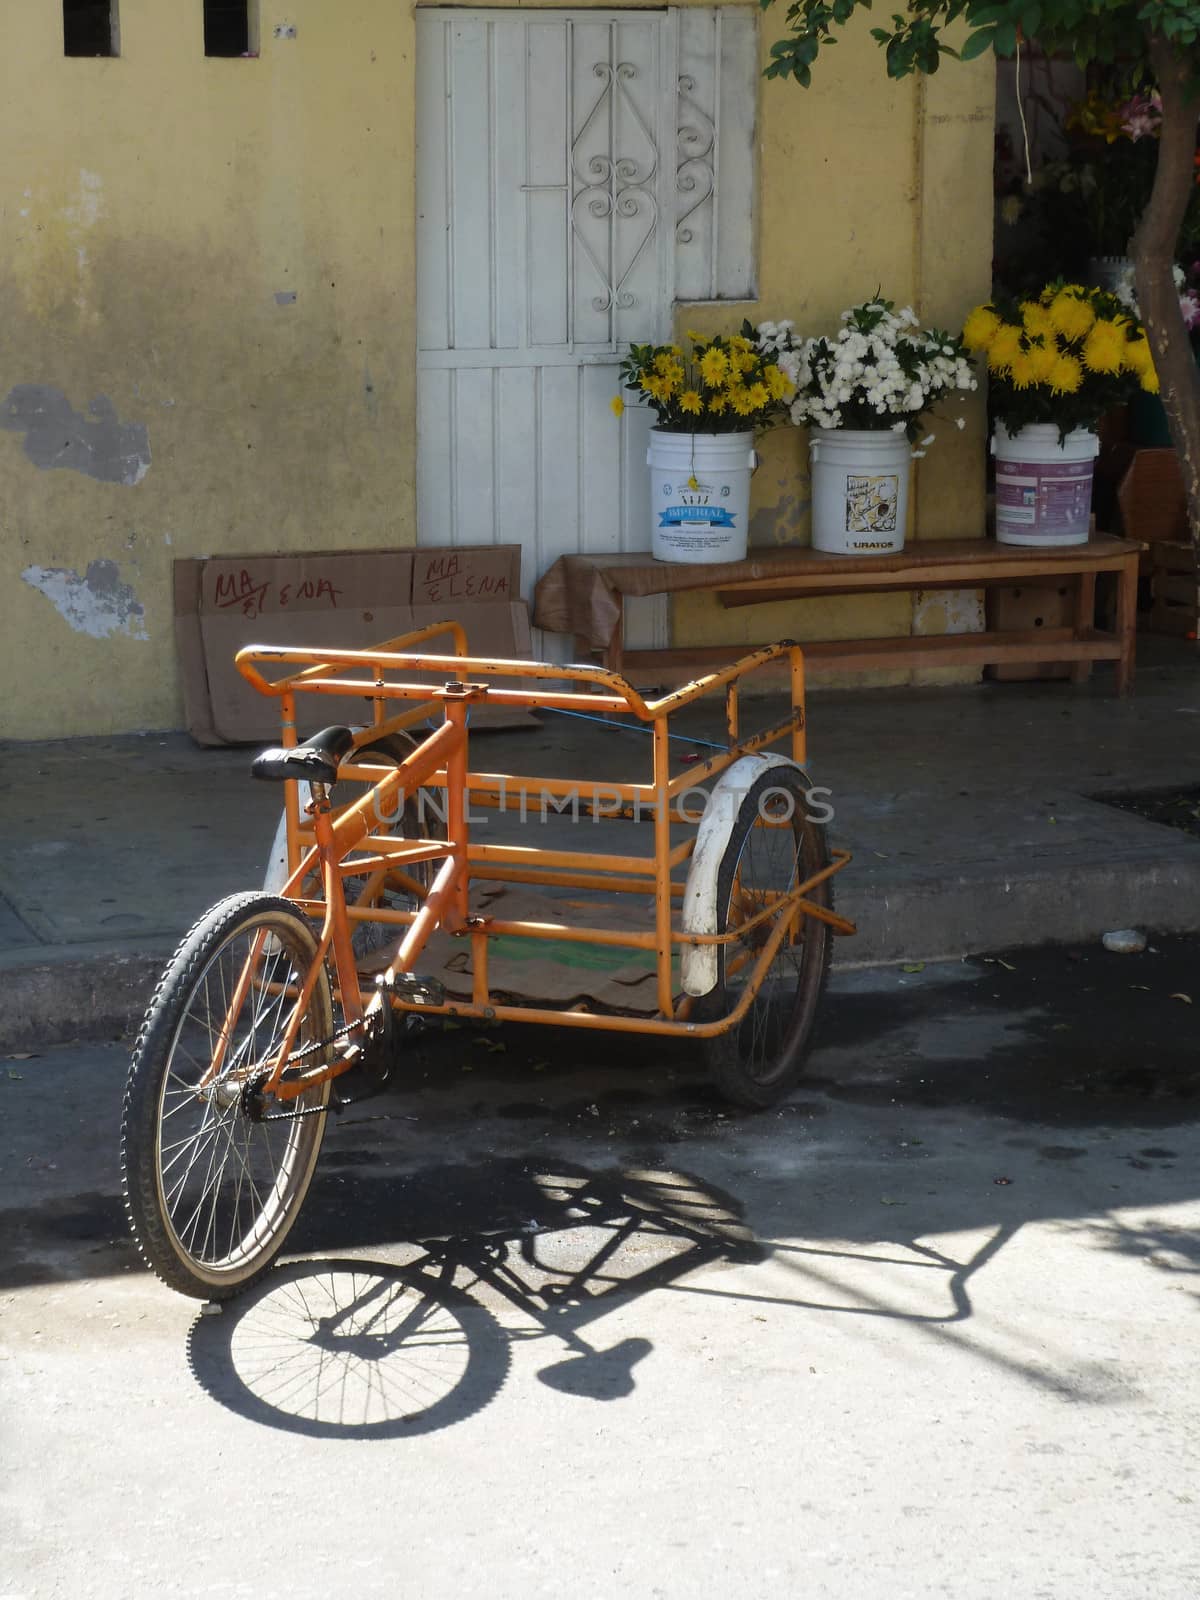 A three wheeled delivery bike outside a house in the town of Huatulco Crucecita, Mexico